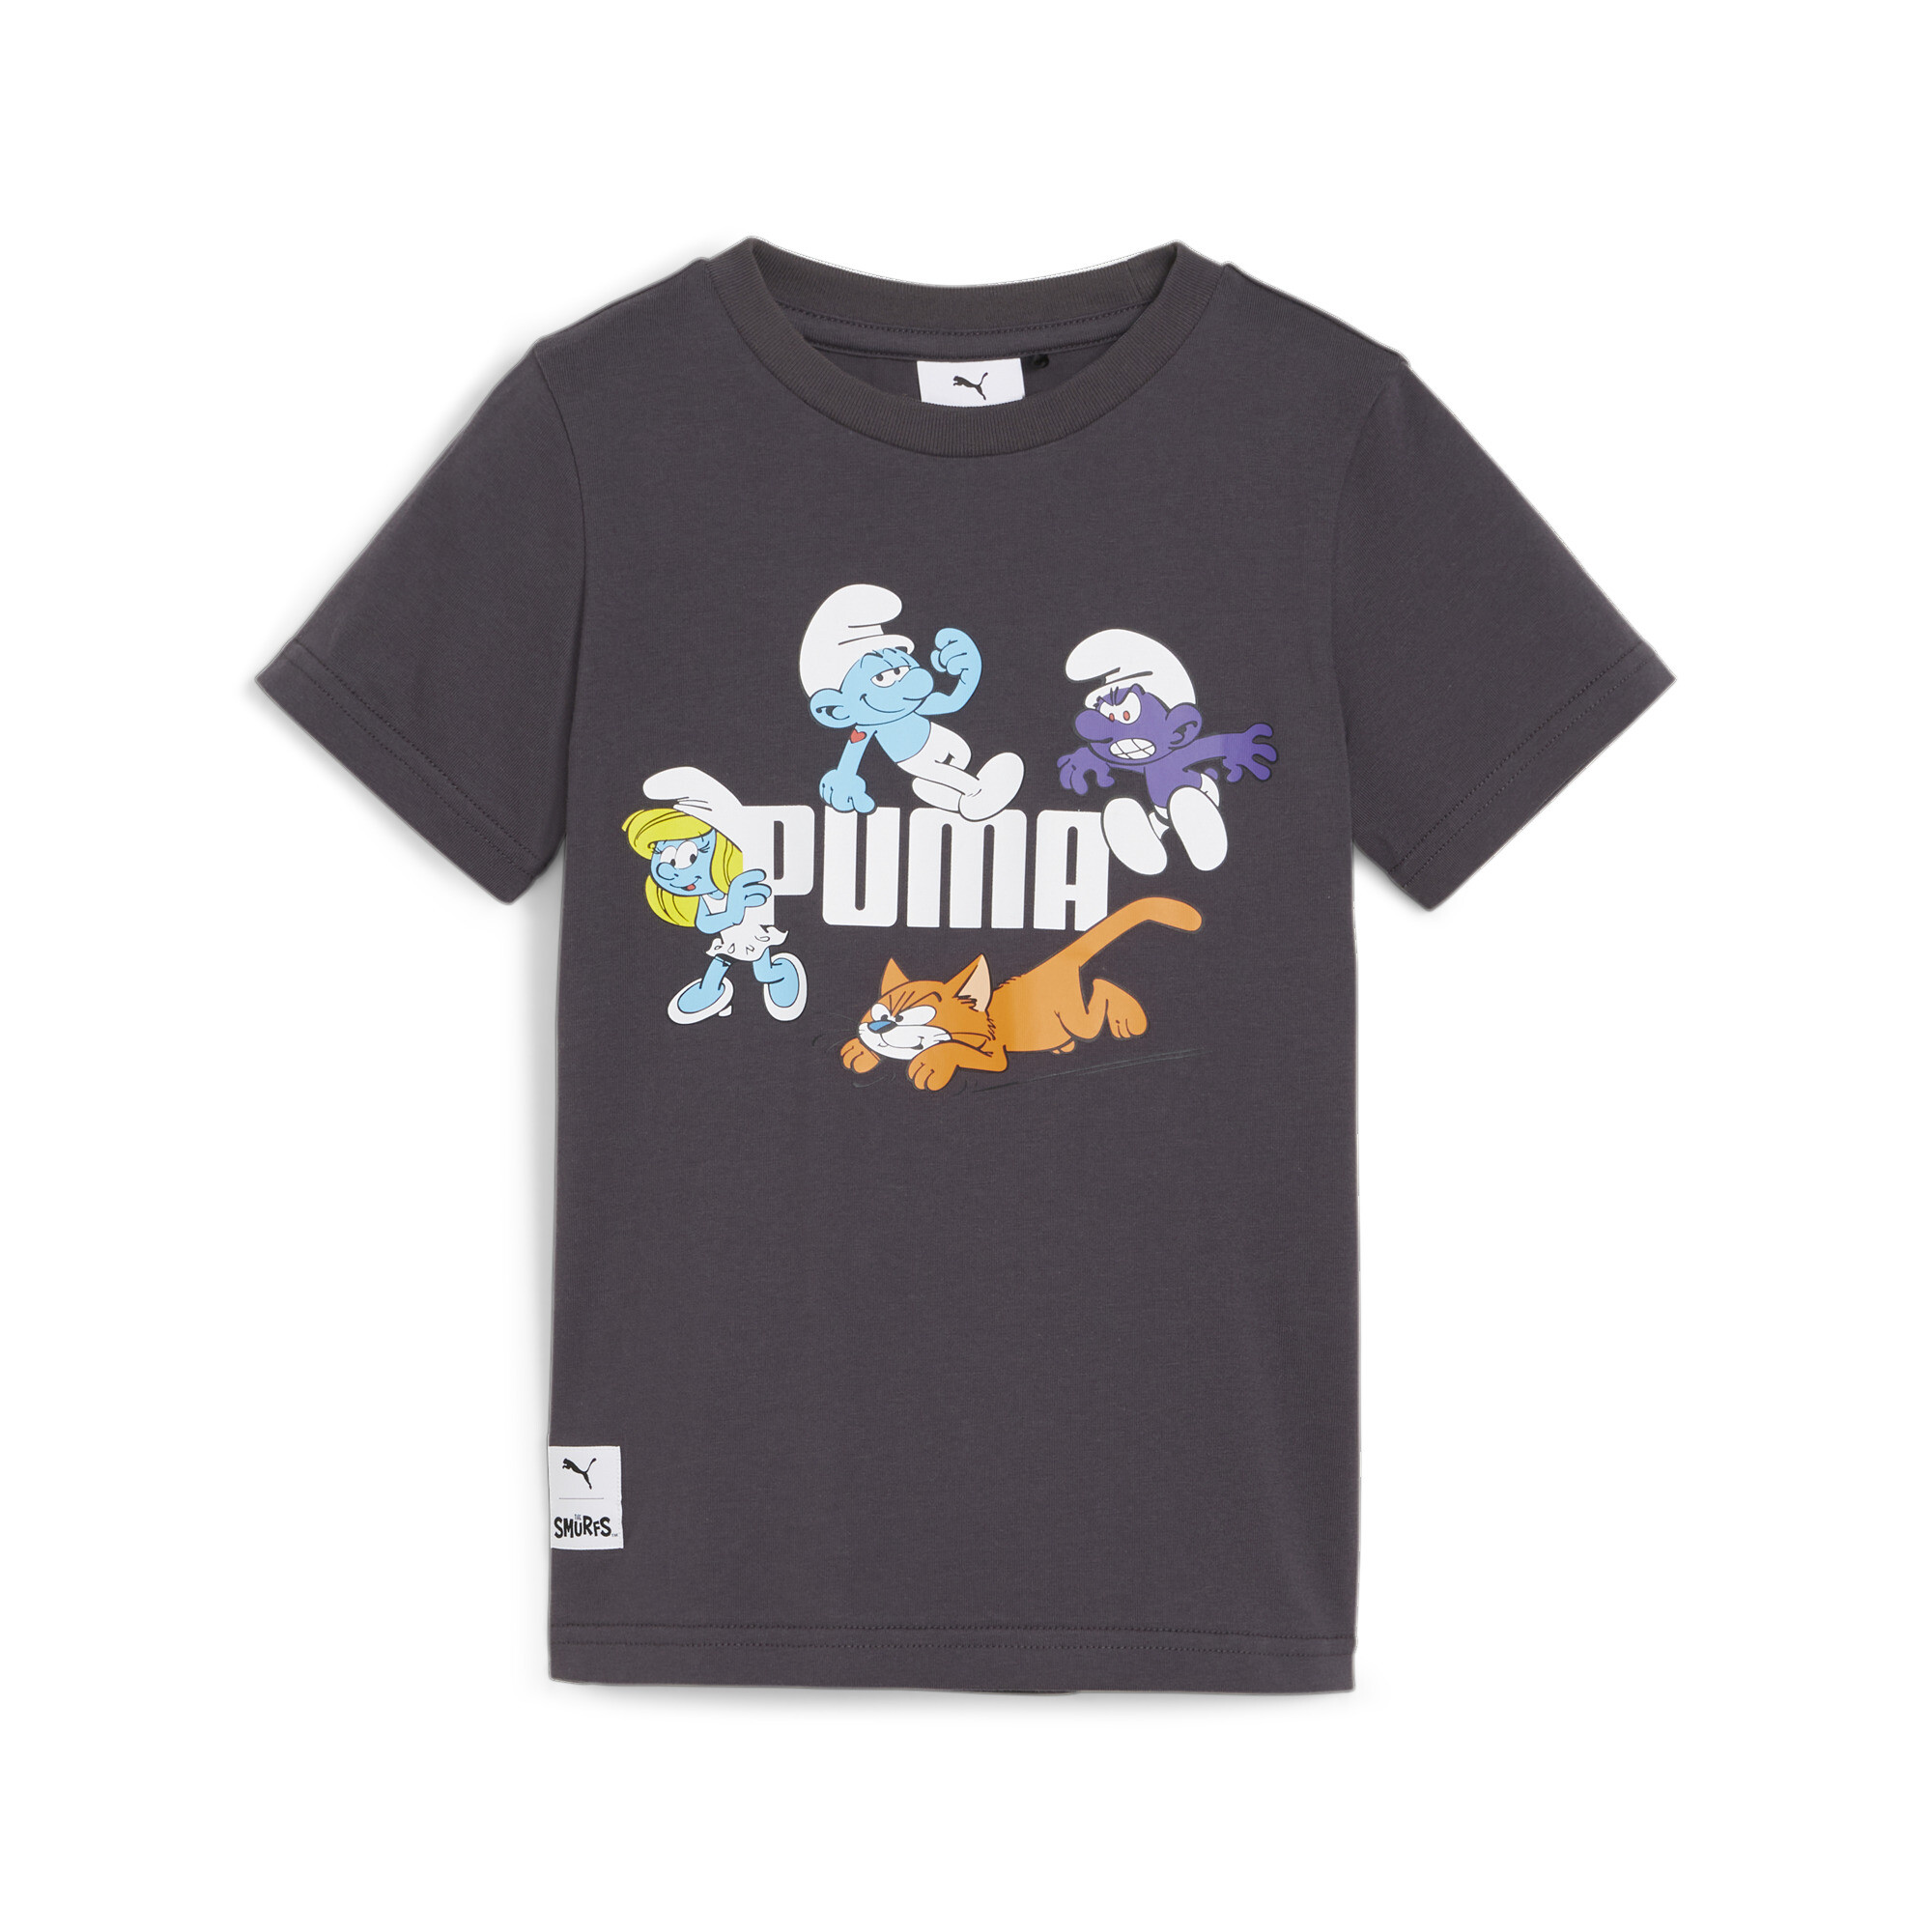 PUMA X THE SMURFS T-Shirt In Gray, Size 7-8 Youth